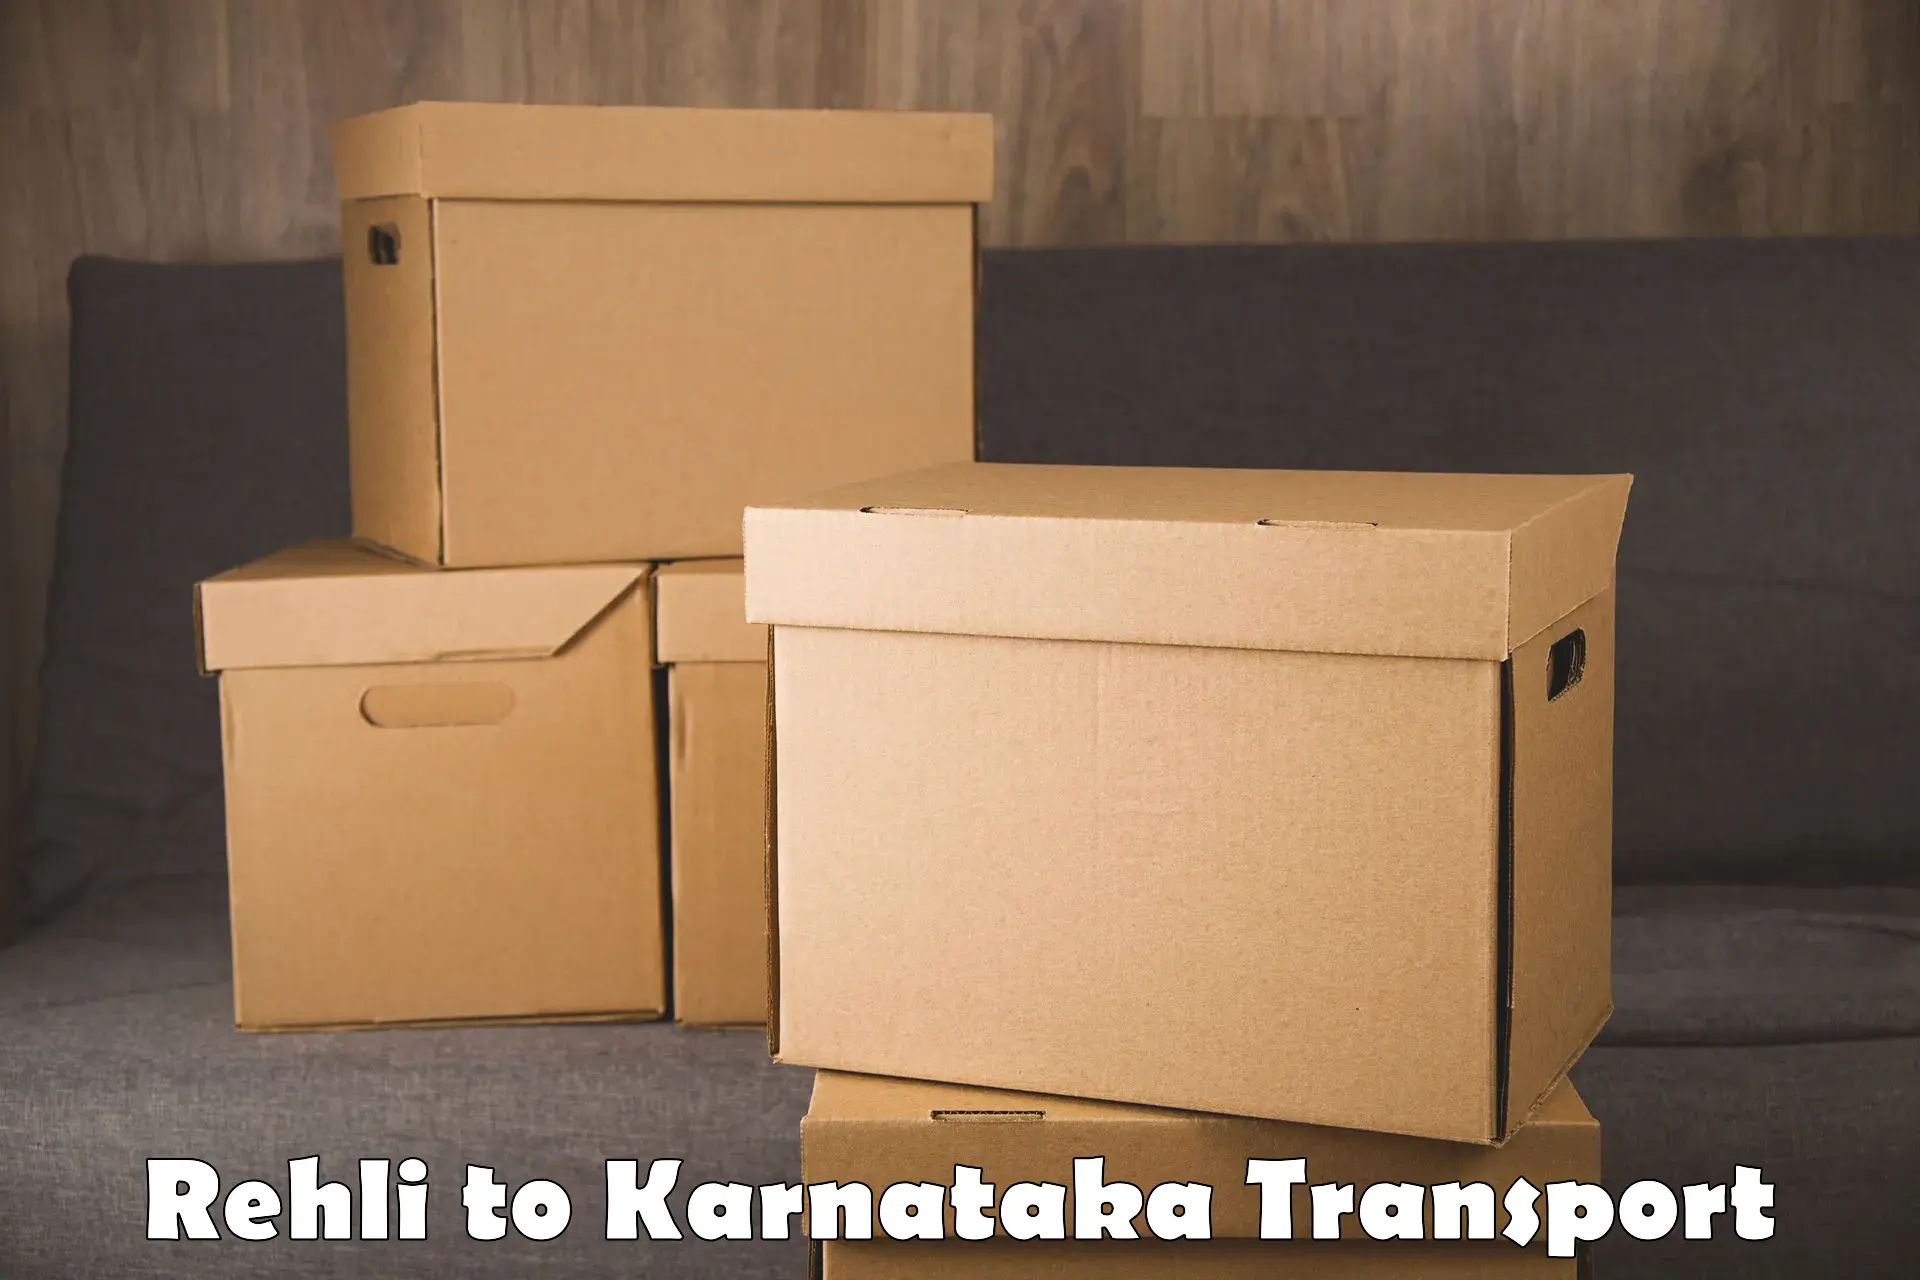 Vehicle parcel service Rehli to Manipal